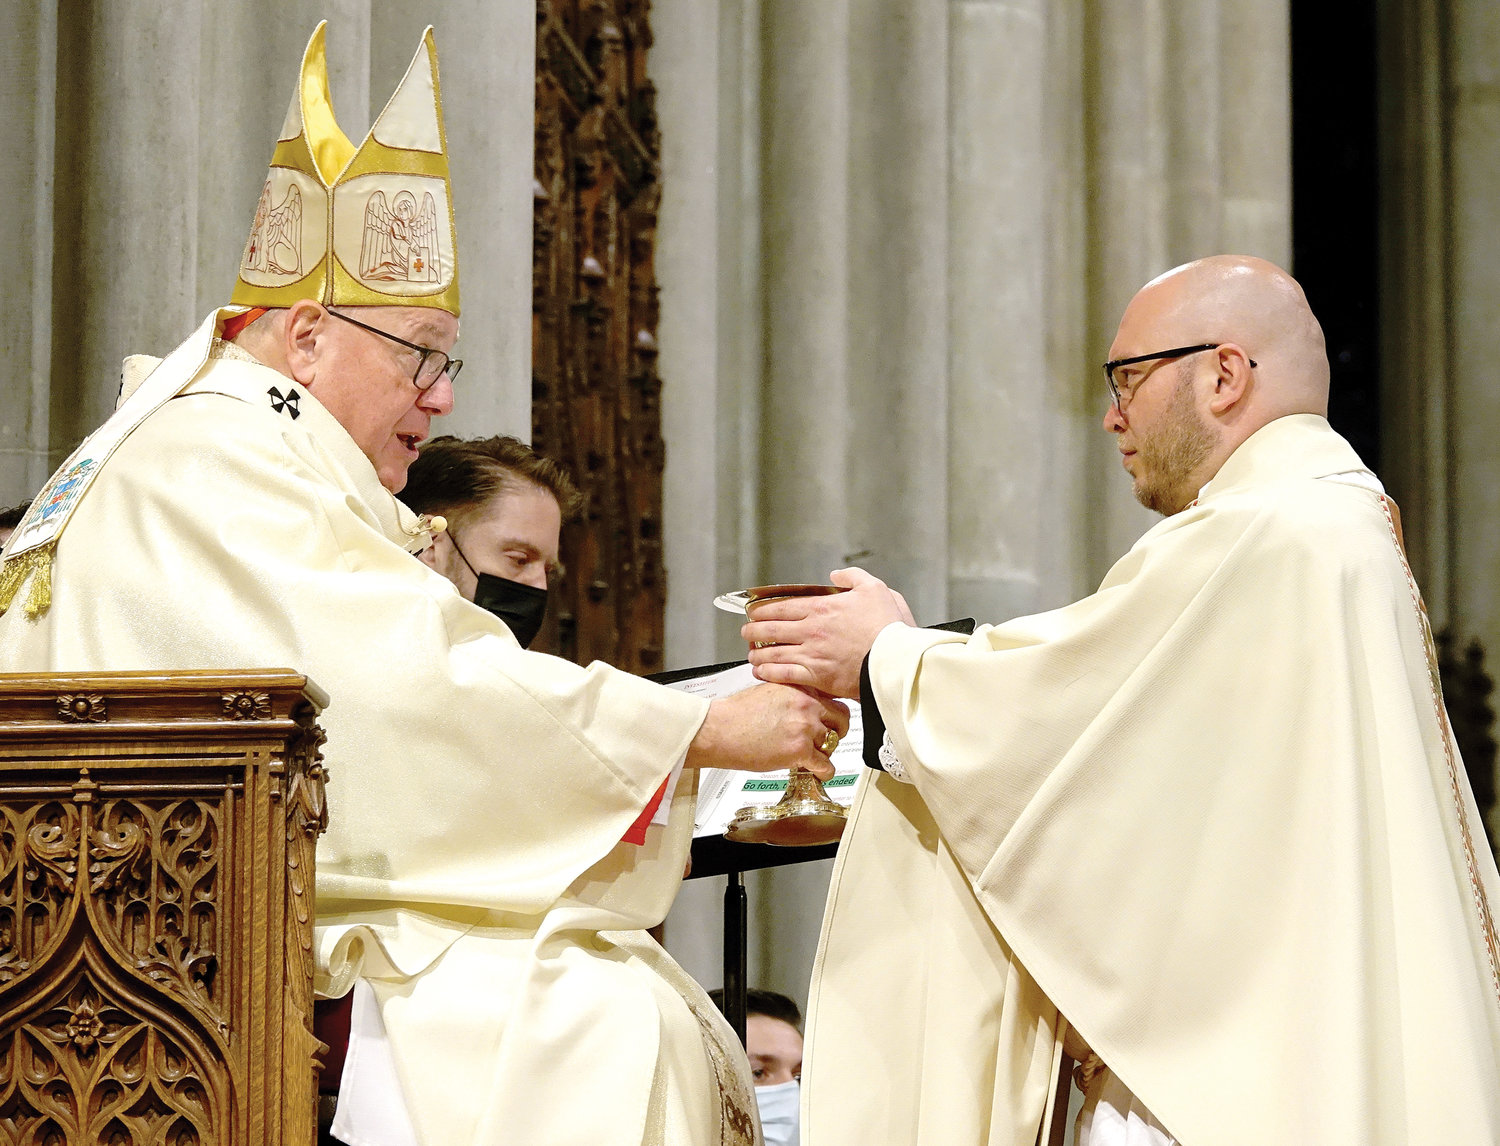 Newly ordained Father Robert Carolan accepts the paten and chalice from Cardinal Dolan during the Mass of Ordination May 29 at St. Patrick’s Cathedral.